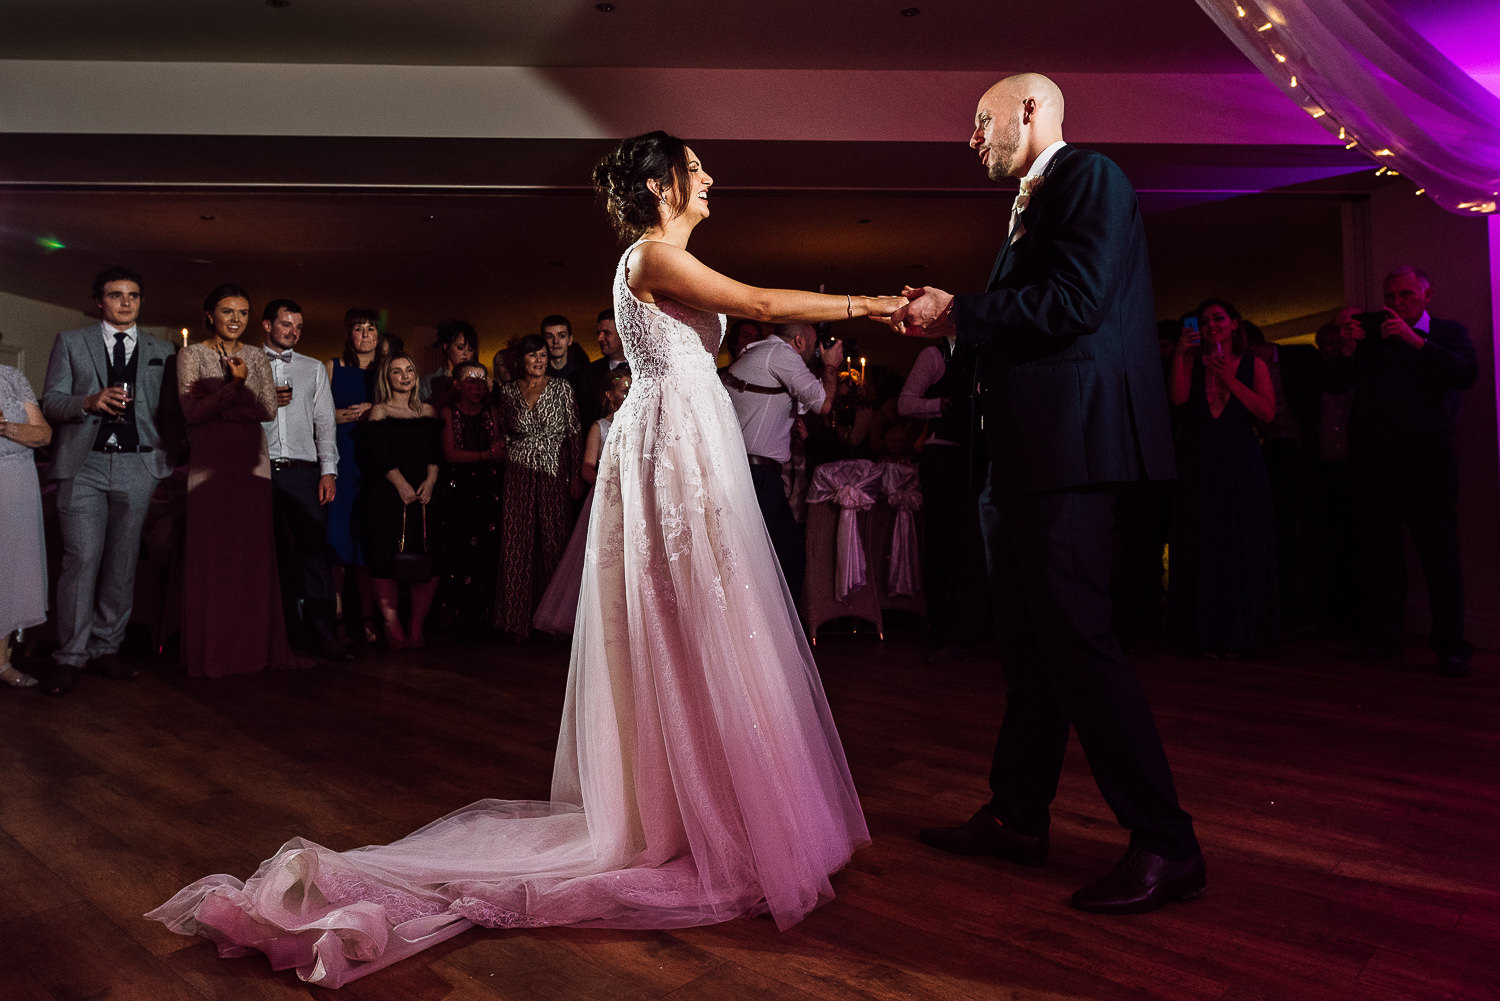 First dance at Mitton Hall